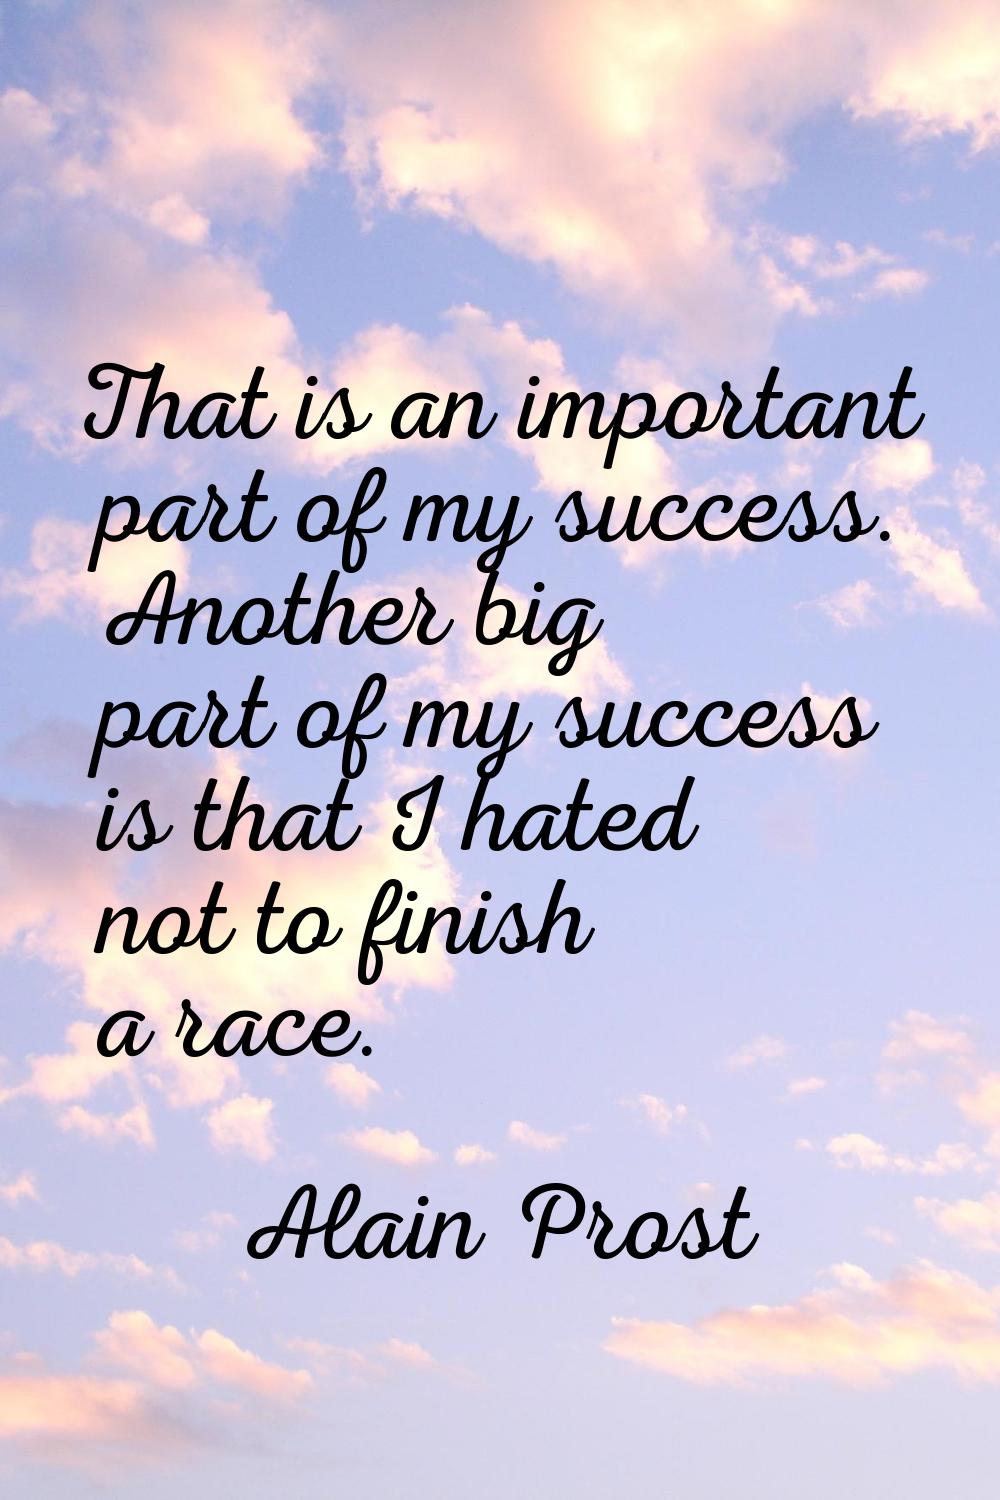 That is an important part of my success. Another big part of my success is that I hated not to fini